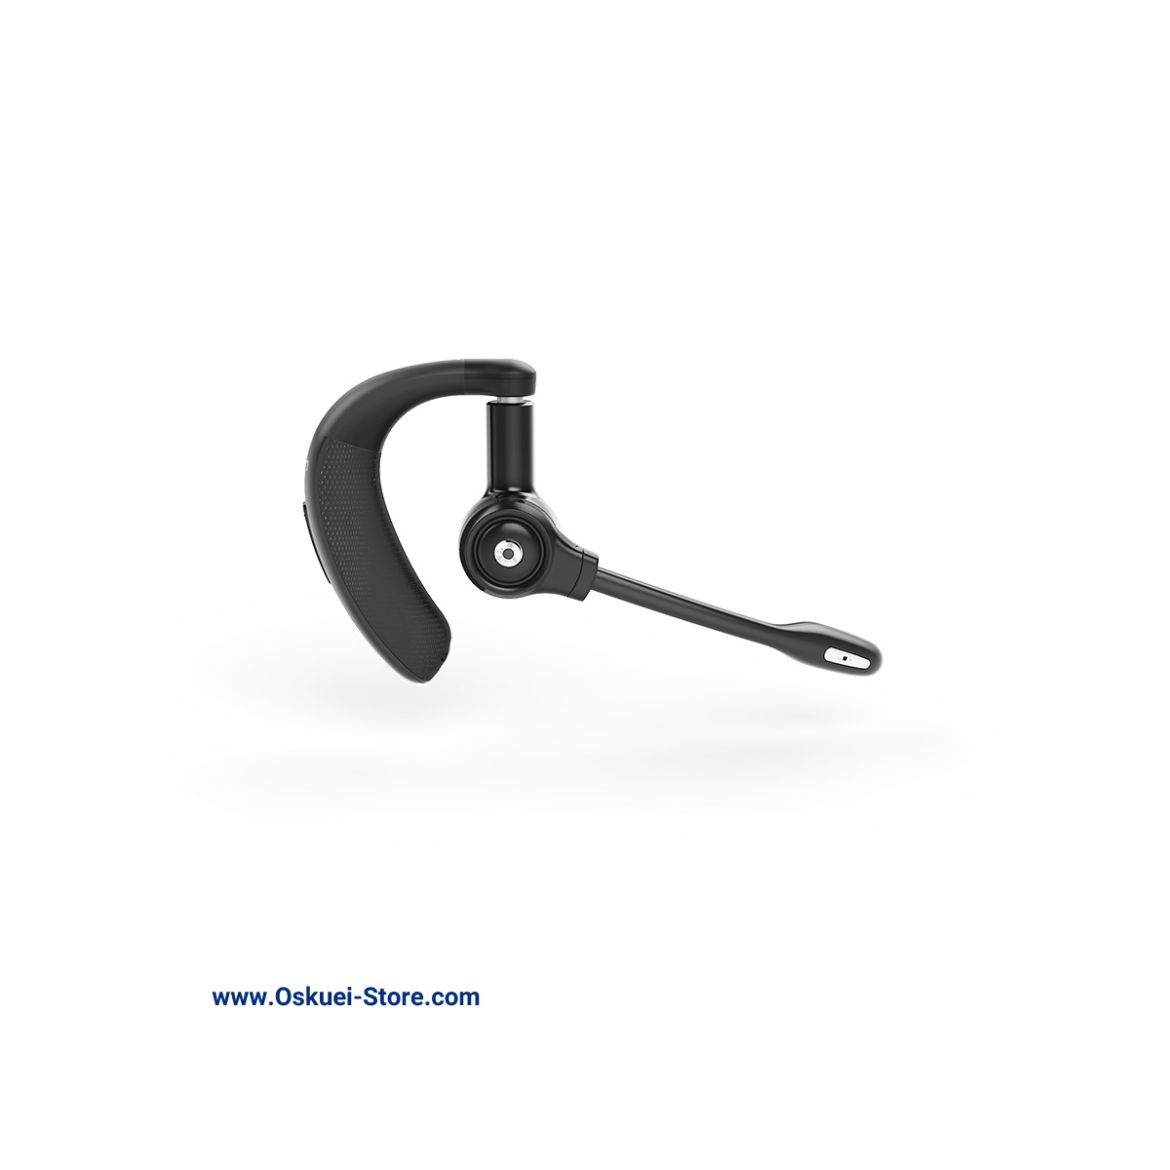 Snom A150 headset perspective